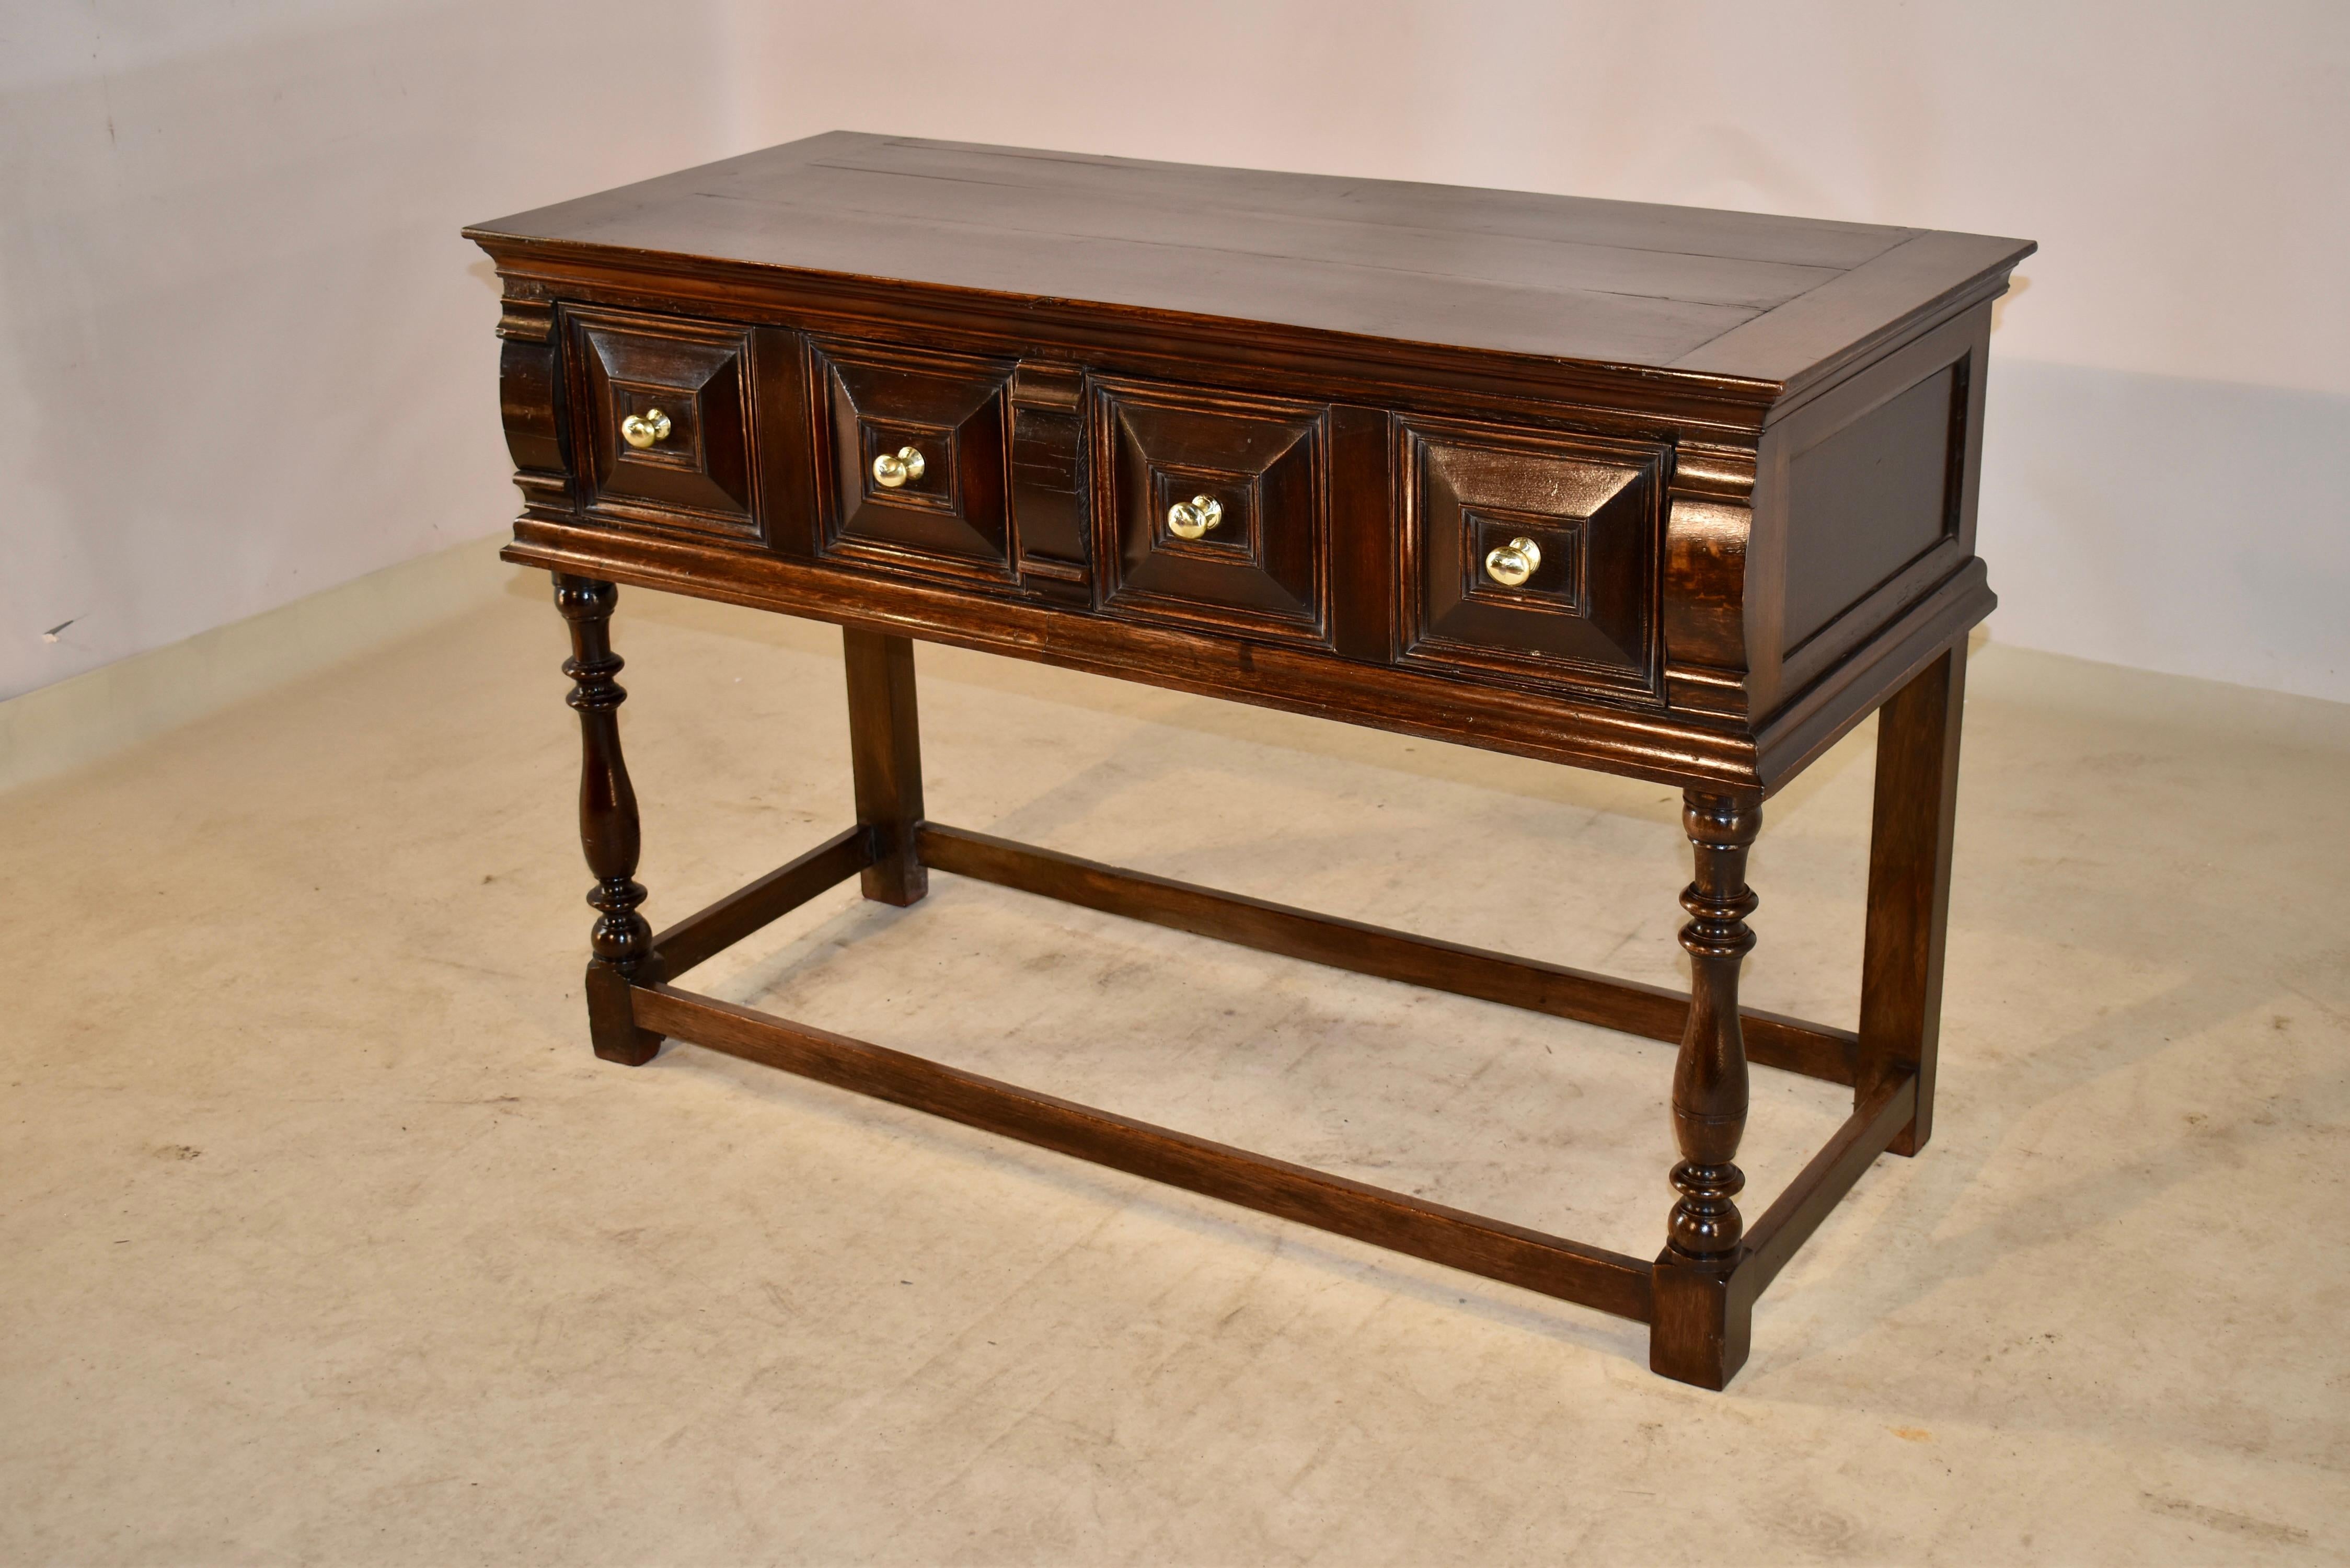 19th Century English Oak Sideboard In Good Condition For Sale In High Point, NC